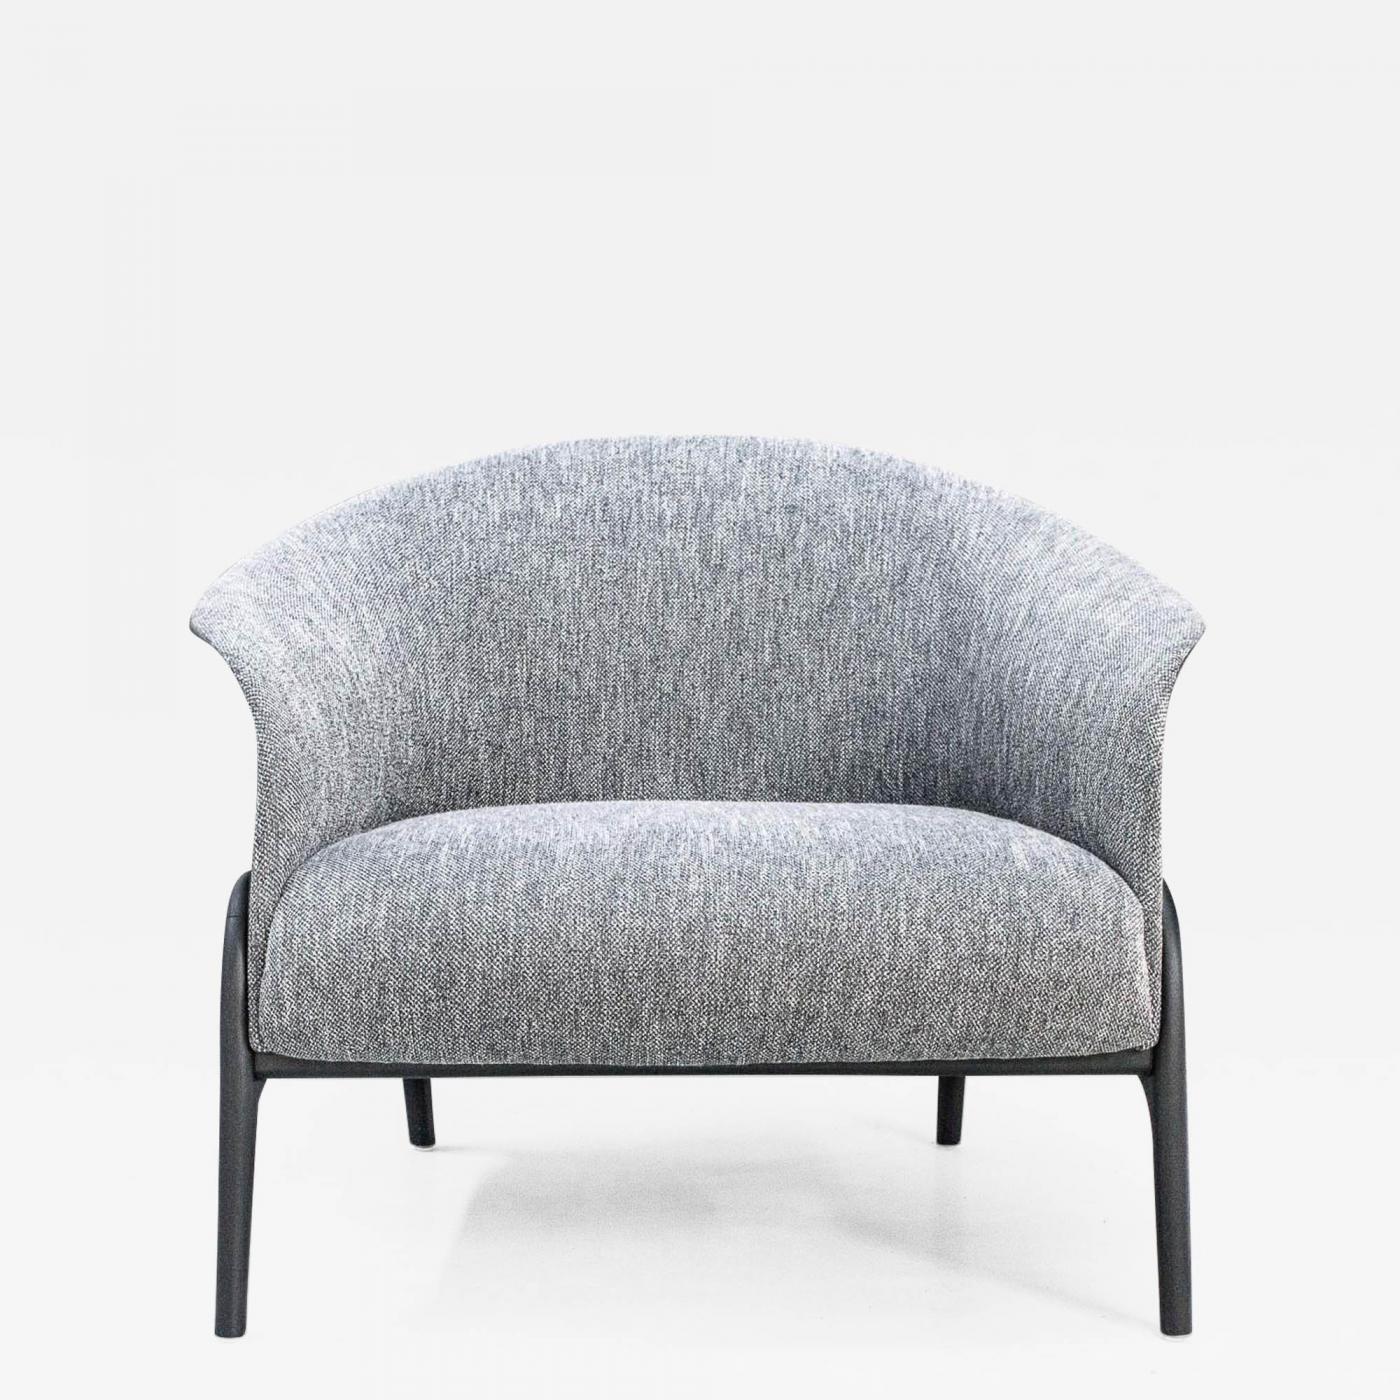 SIMONINI© - Modern Organic style armchair in Solid Wood, Upholstered  Flexible Seating